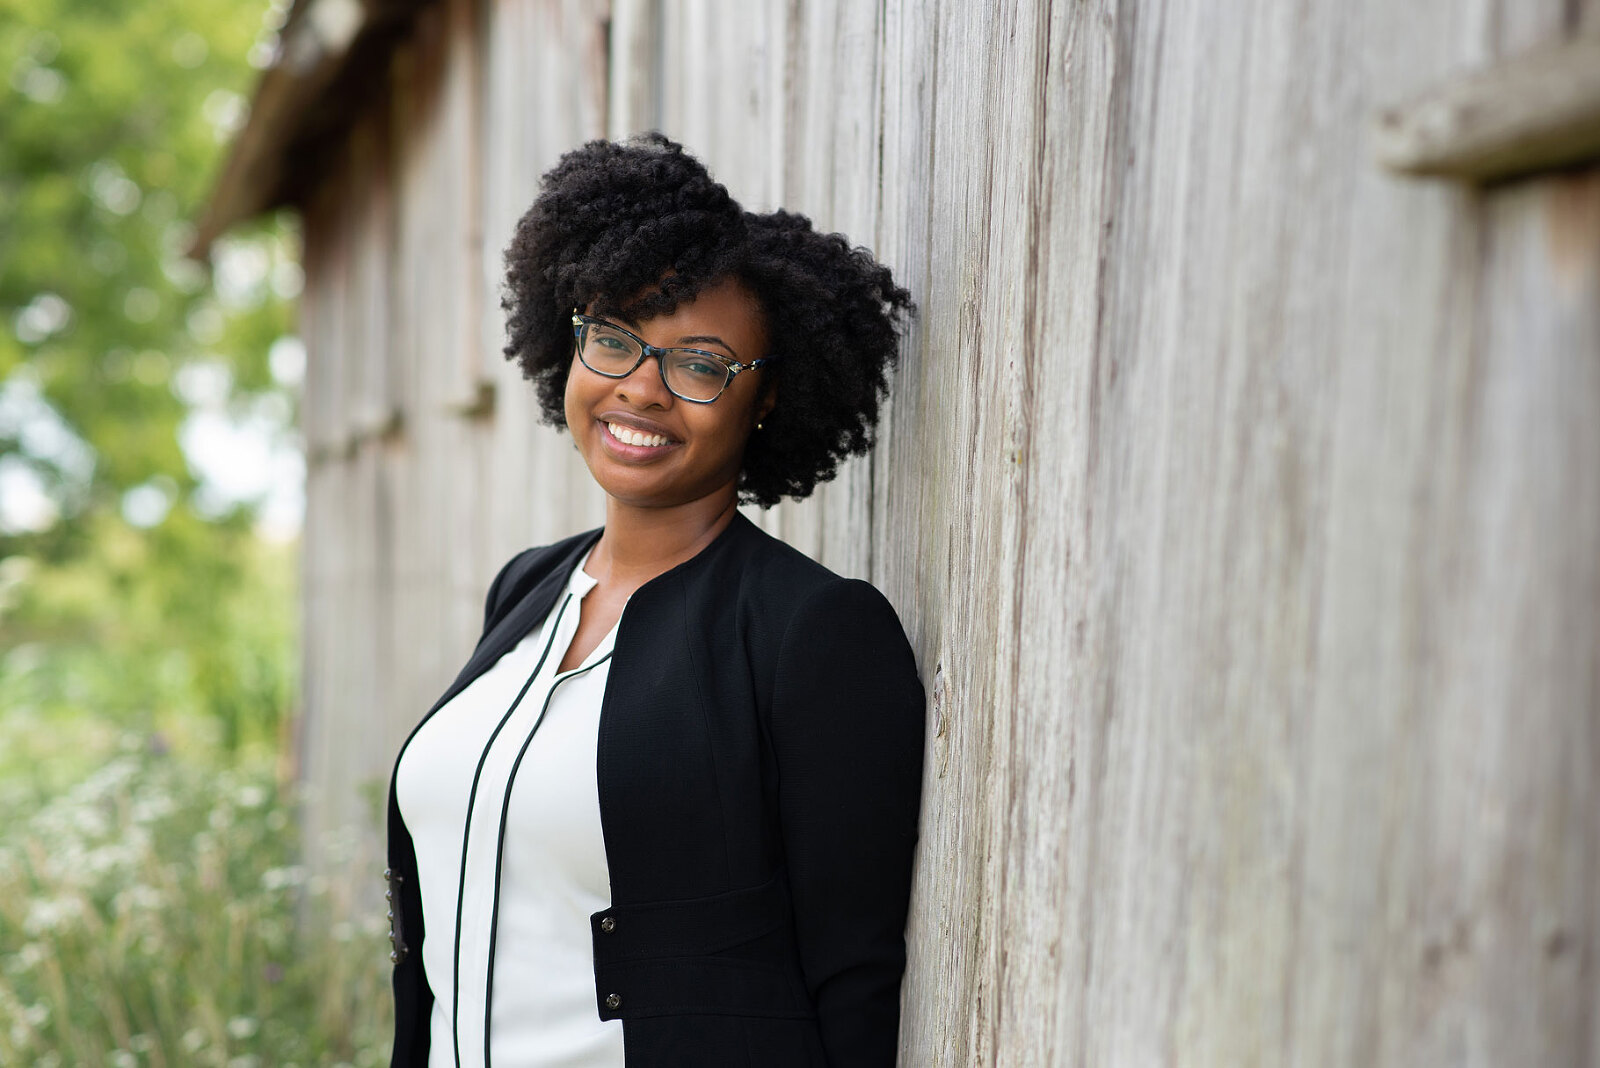 a young professional poses near an old barn for a headshot portrait